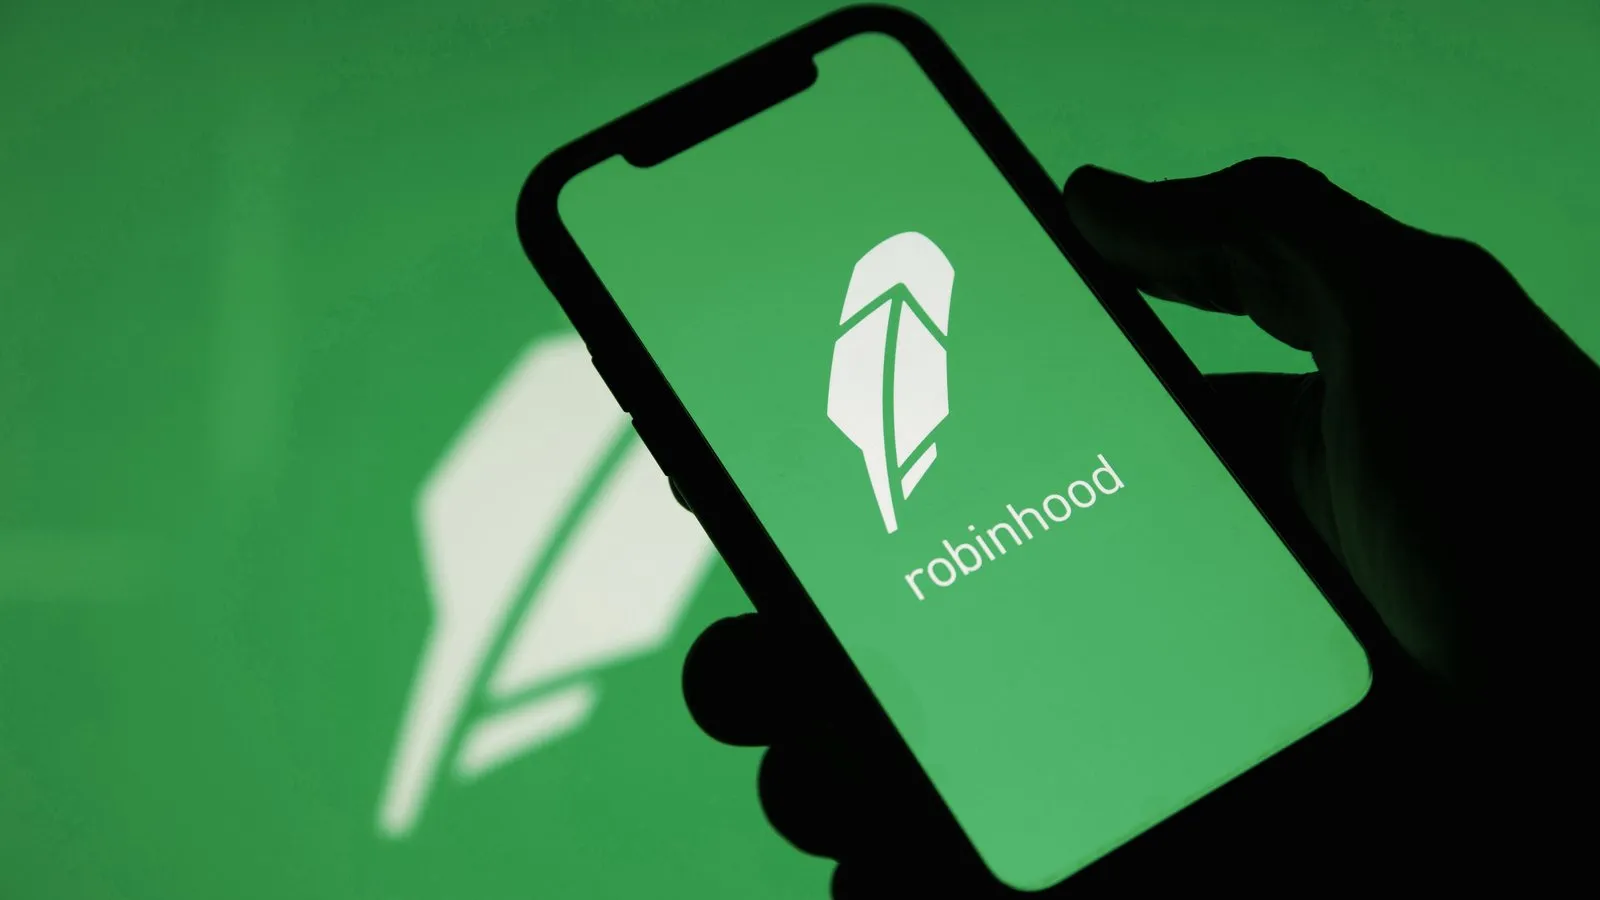 Robinhood app — how it works and everything you need to know